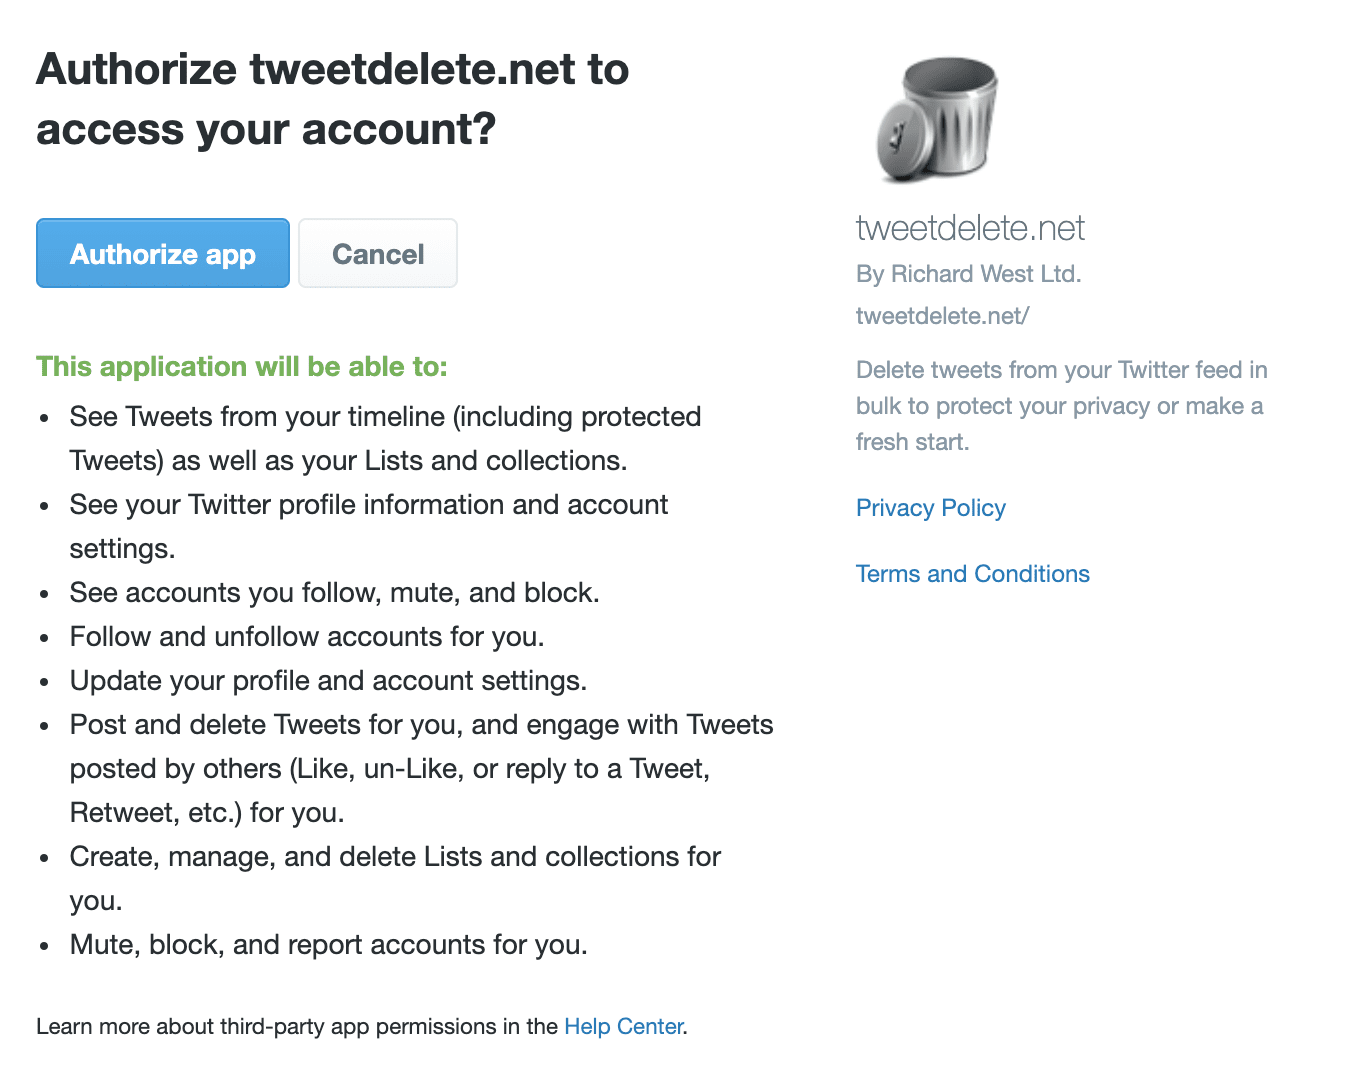 The permissions lists is lengthy, but TweetDelete says it only requires them to remove the posts.